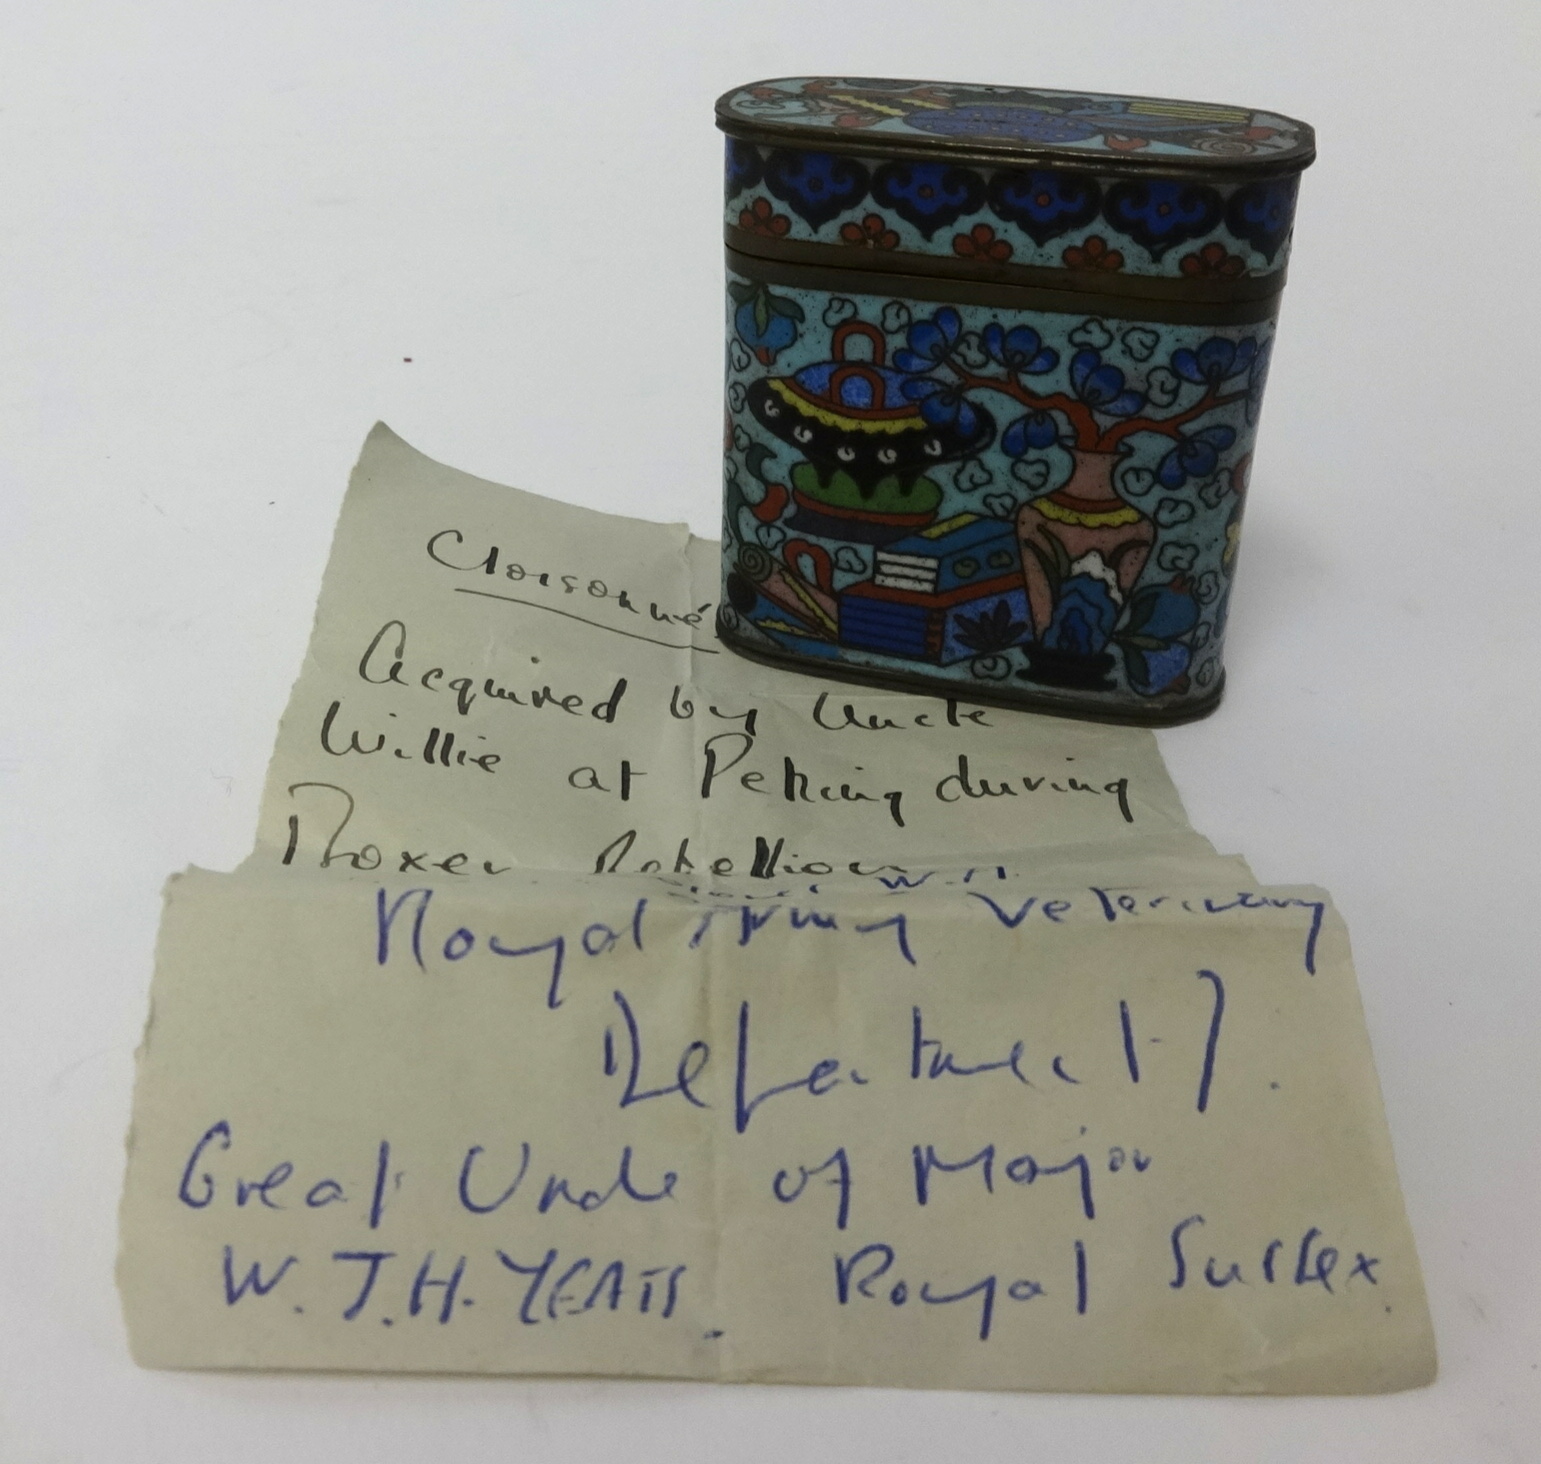 Cloisonné enamelled box and cover inside a hand written note 'Acquired by Uncle Willy at Peking